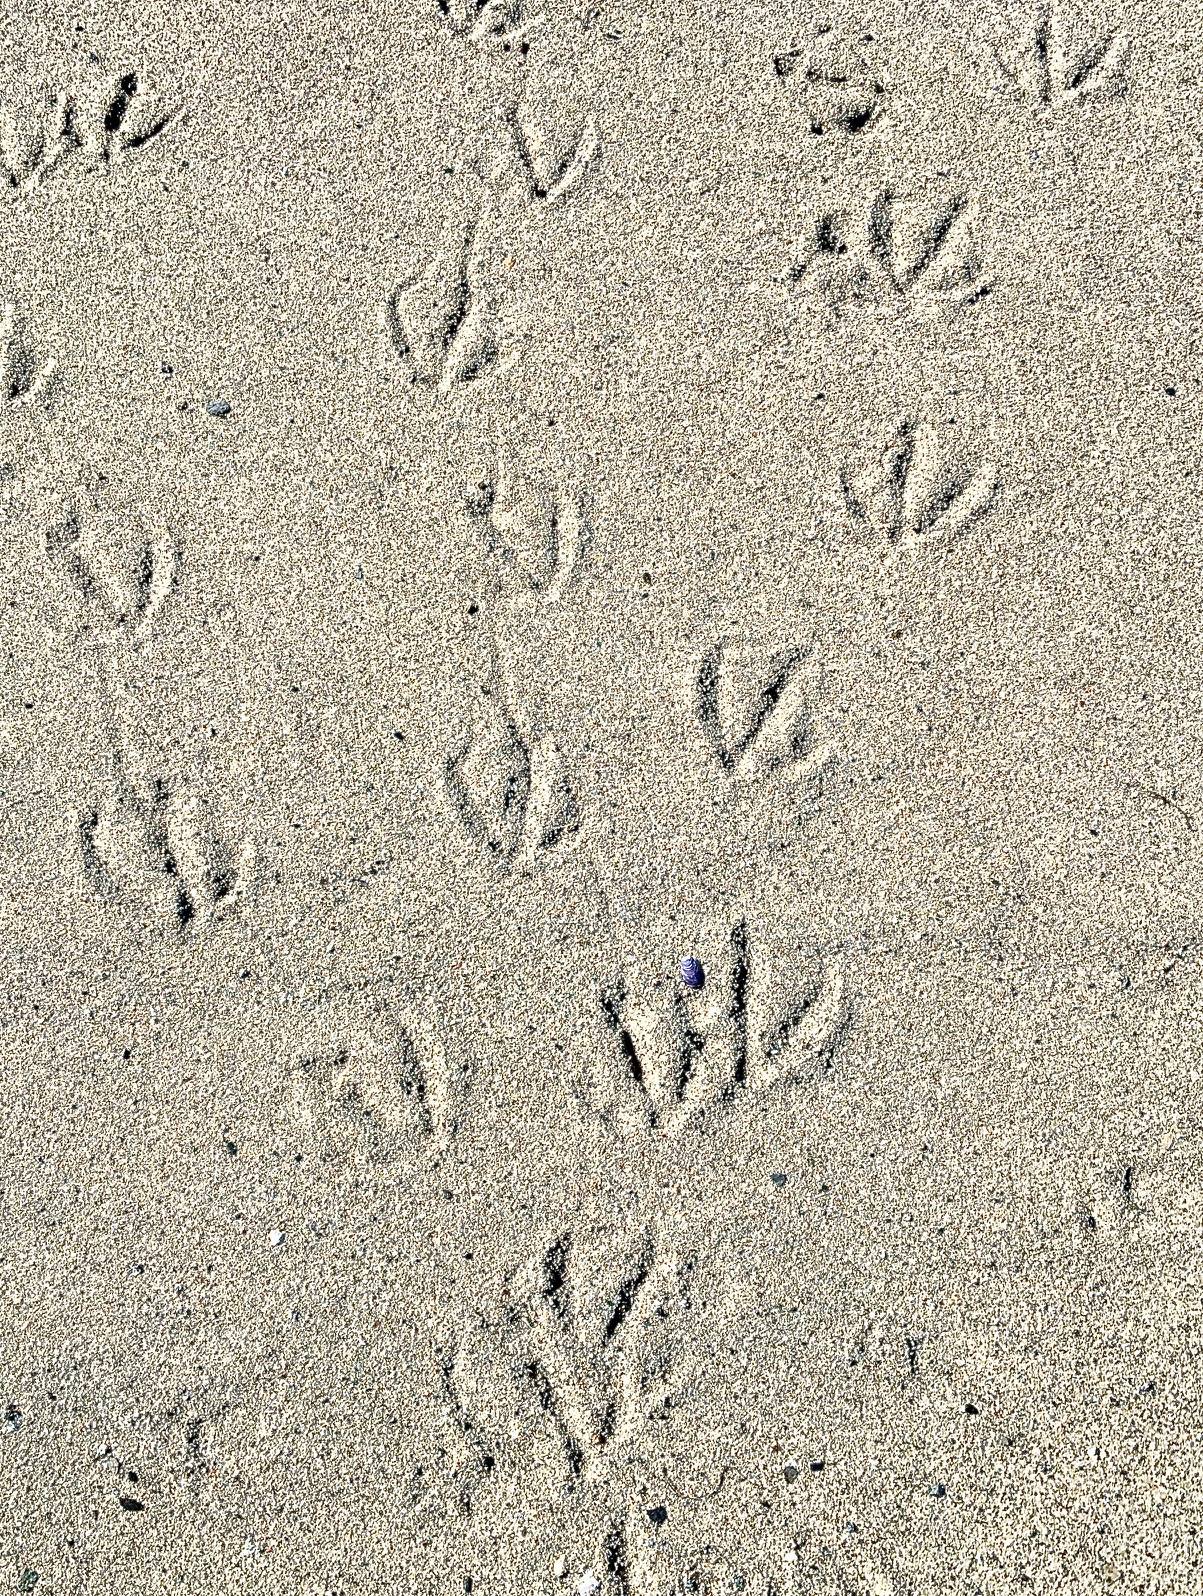 Evidence of a Canada geese line dance is visible on Boy Scout beach sand on April 18, 2020. (Courtesy Photo | Denise Carroll)